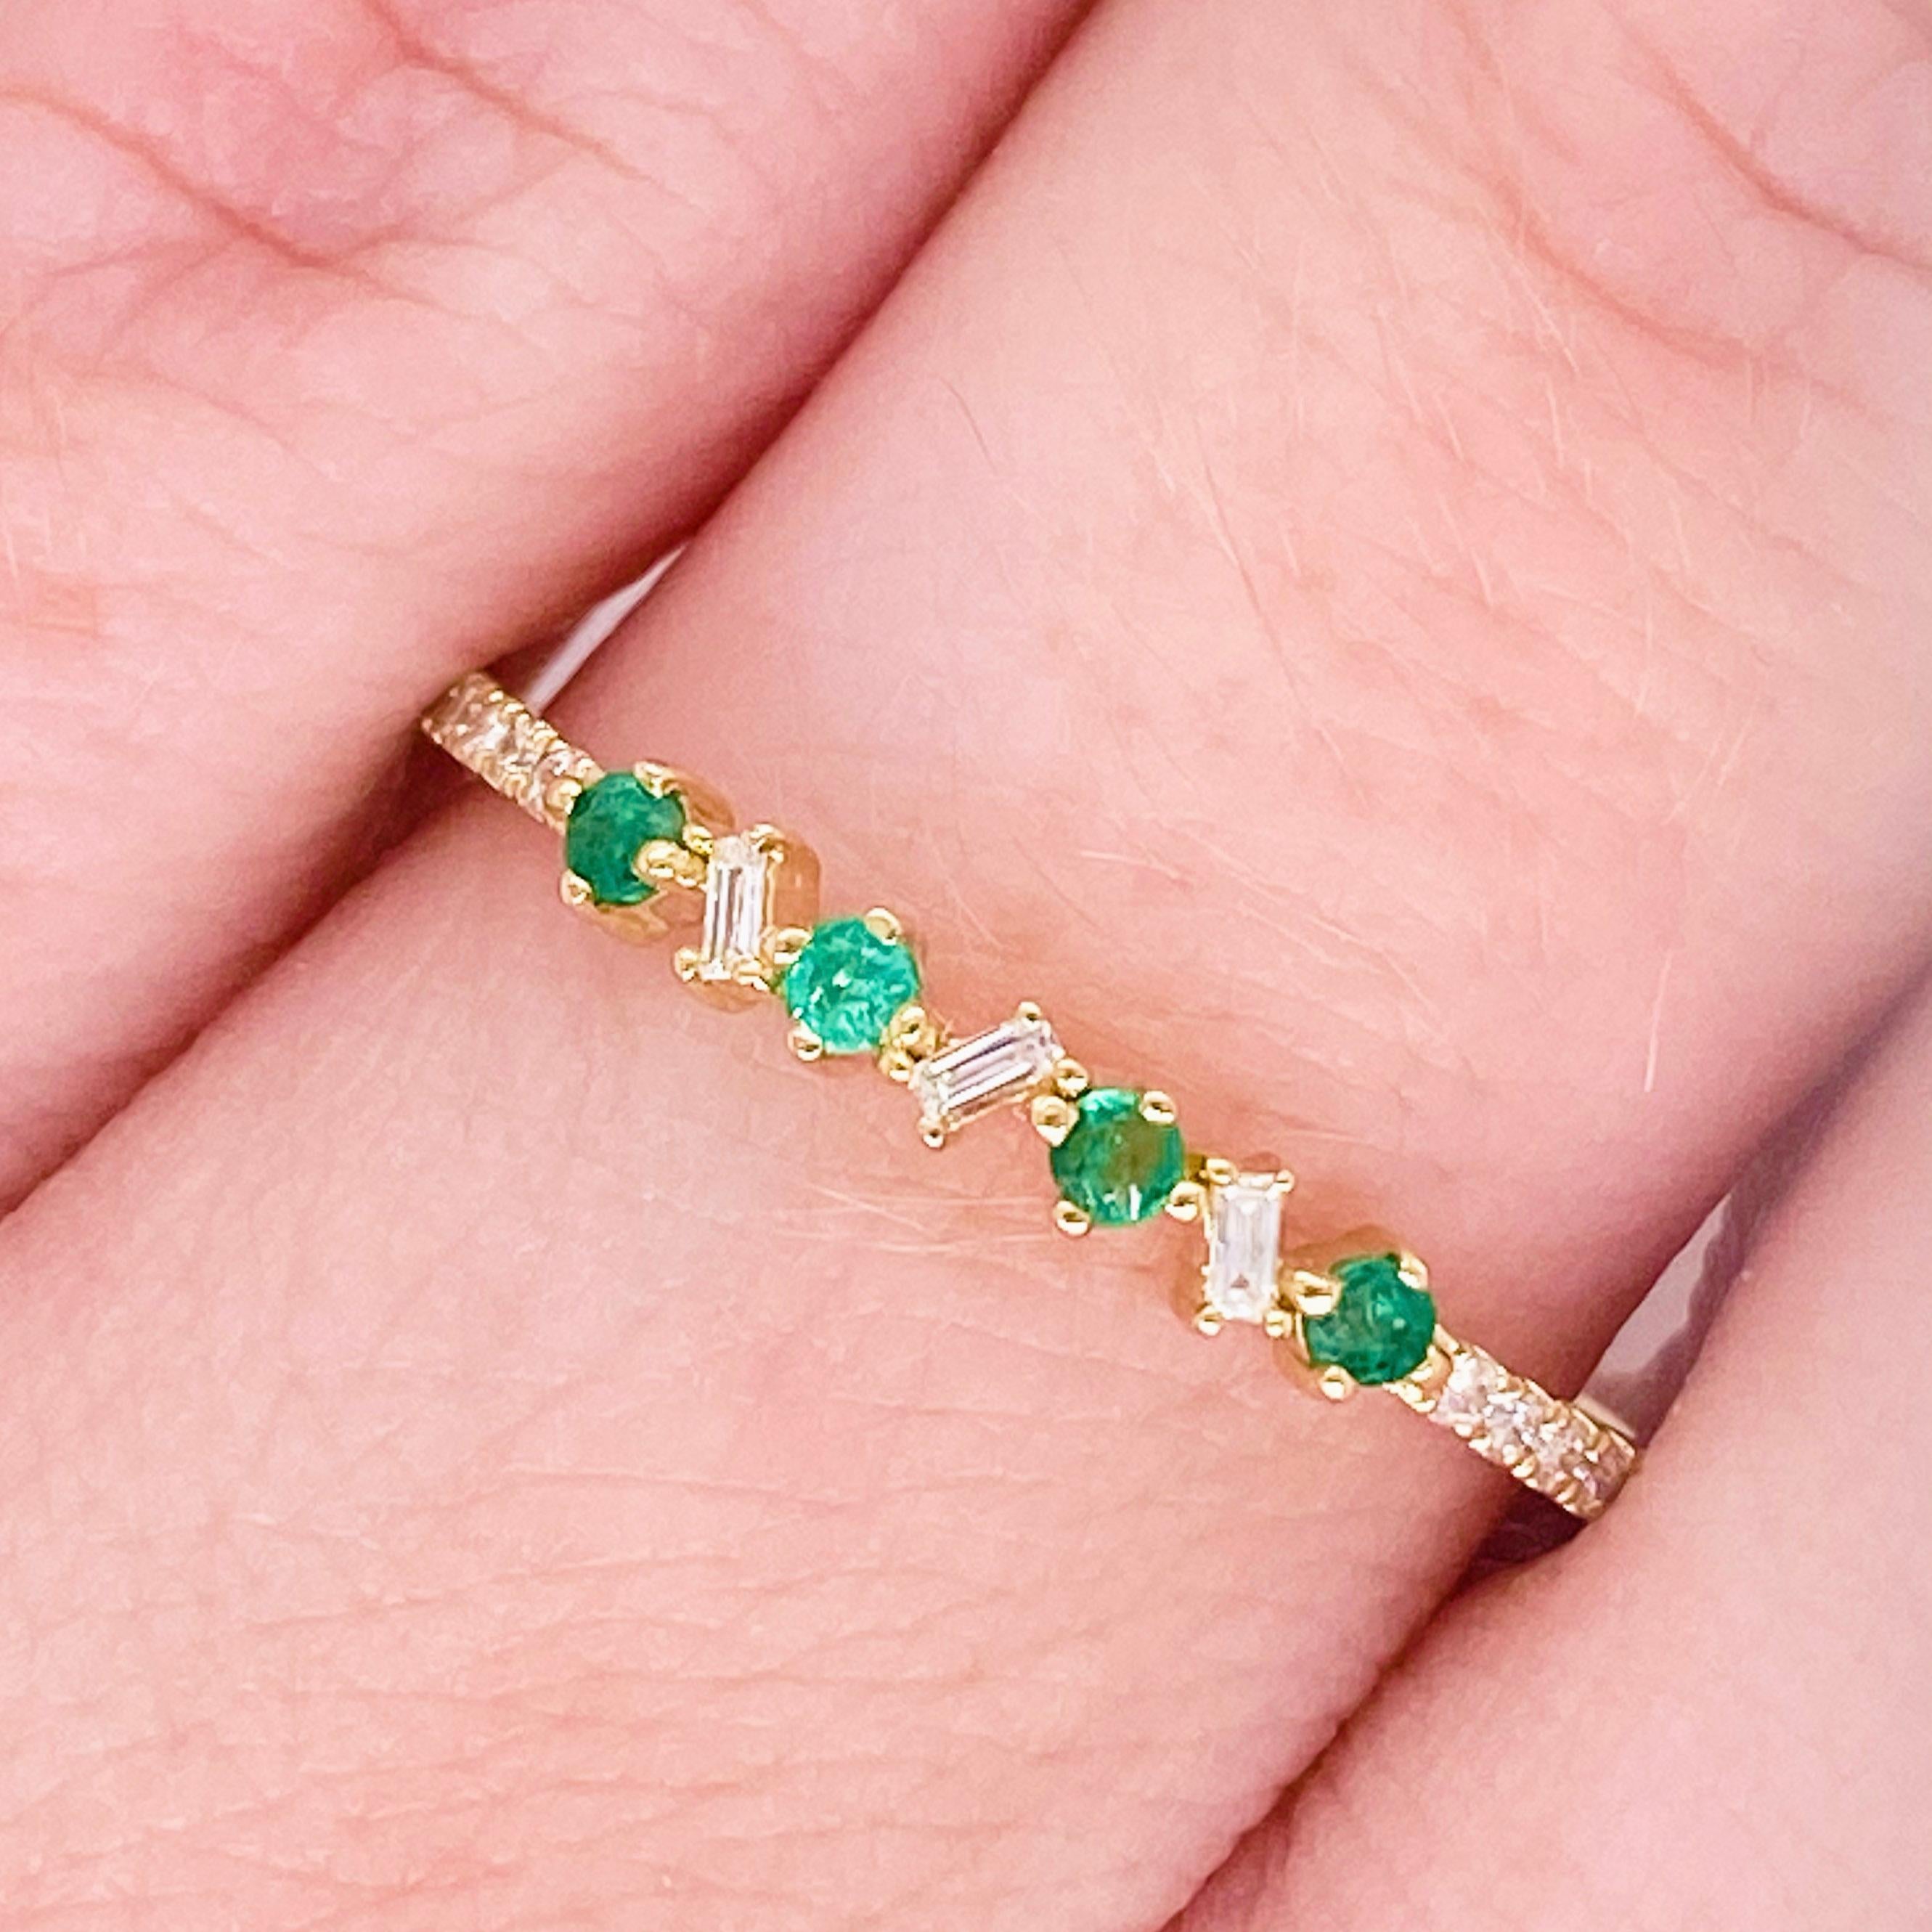 Vibrant emeralds and bright white diamonds have never looked better! This emerald and diamond band has genuine, natural round emerald gemstones set next to bright baguette and round white diamonds. The stones are set in an 14 karat yellow gold band!